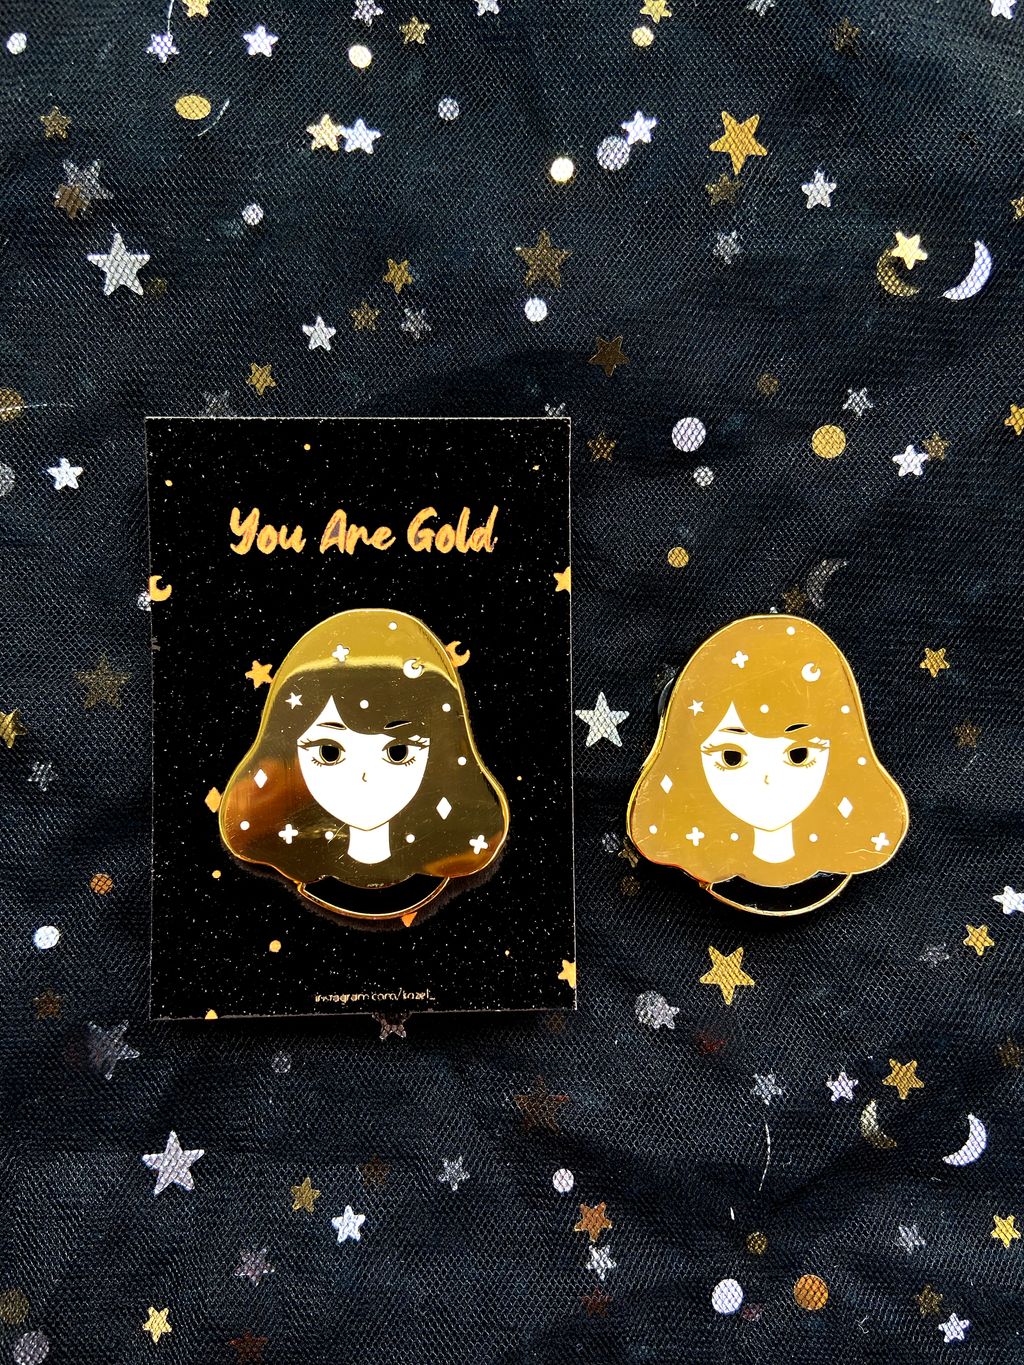 4 You Are Gold Hard Gold Enamel Pin A.JPG